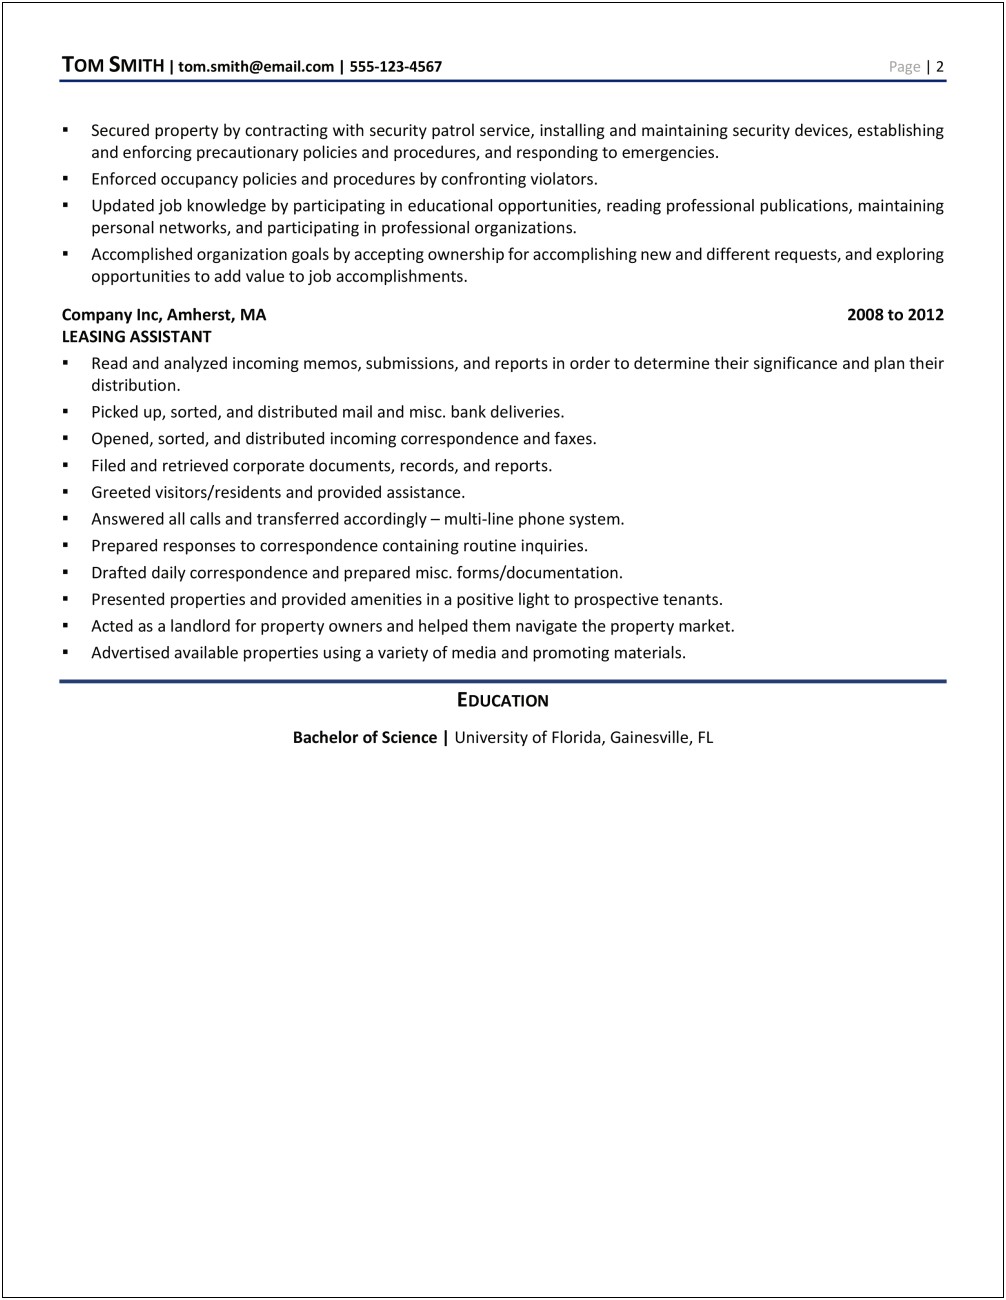 Resume Objective For Claims Specialist